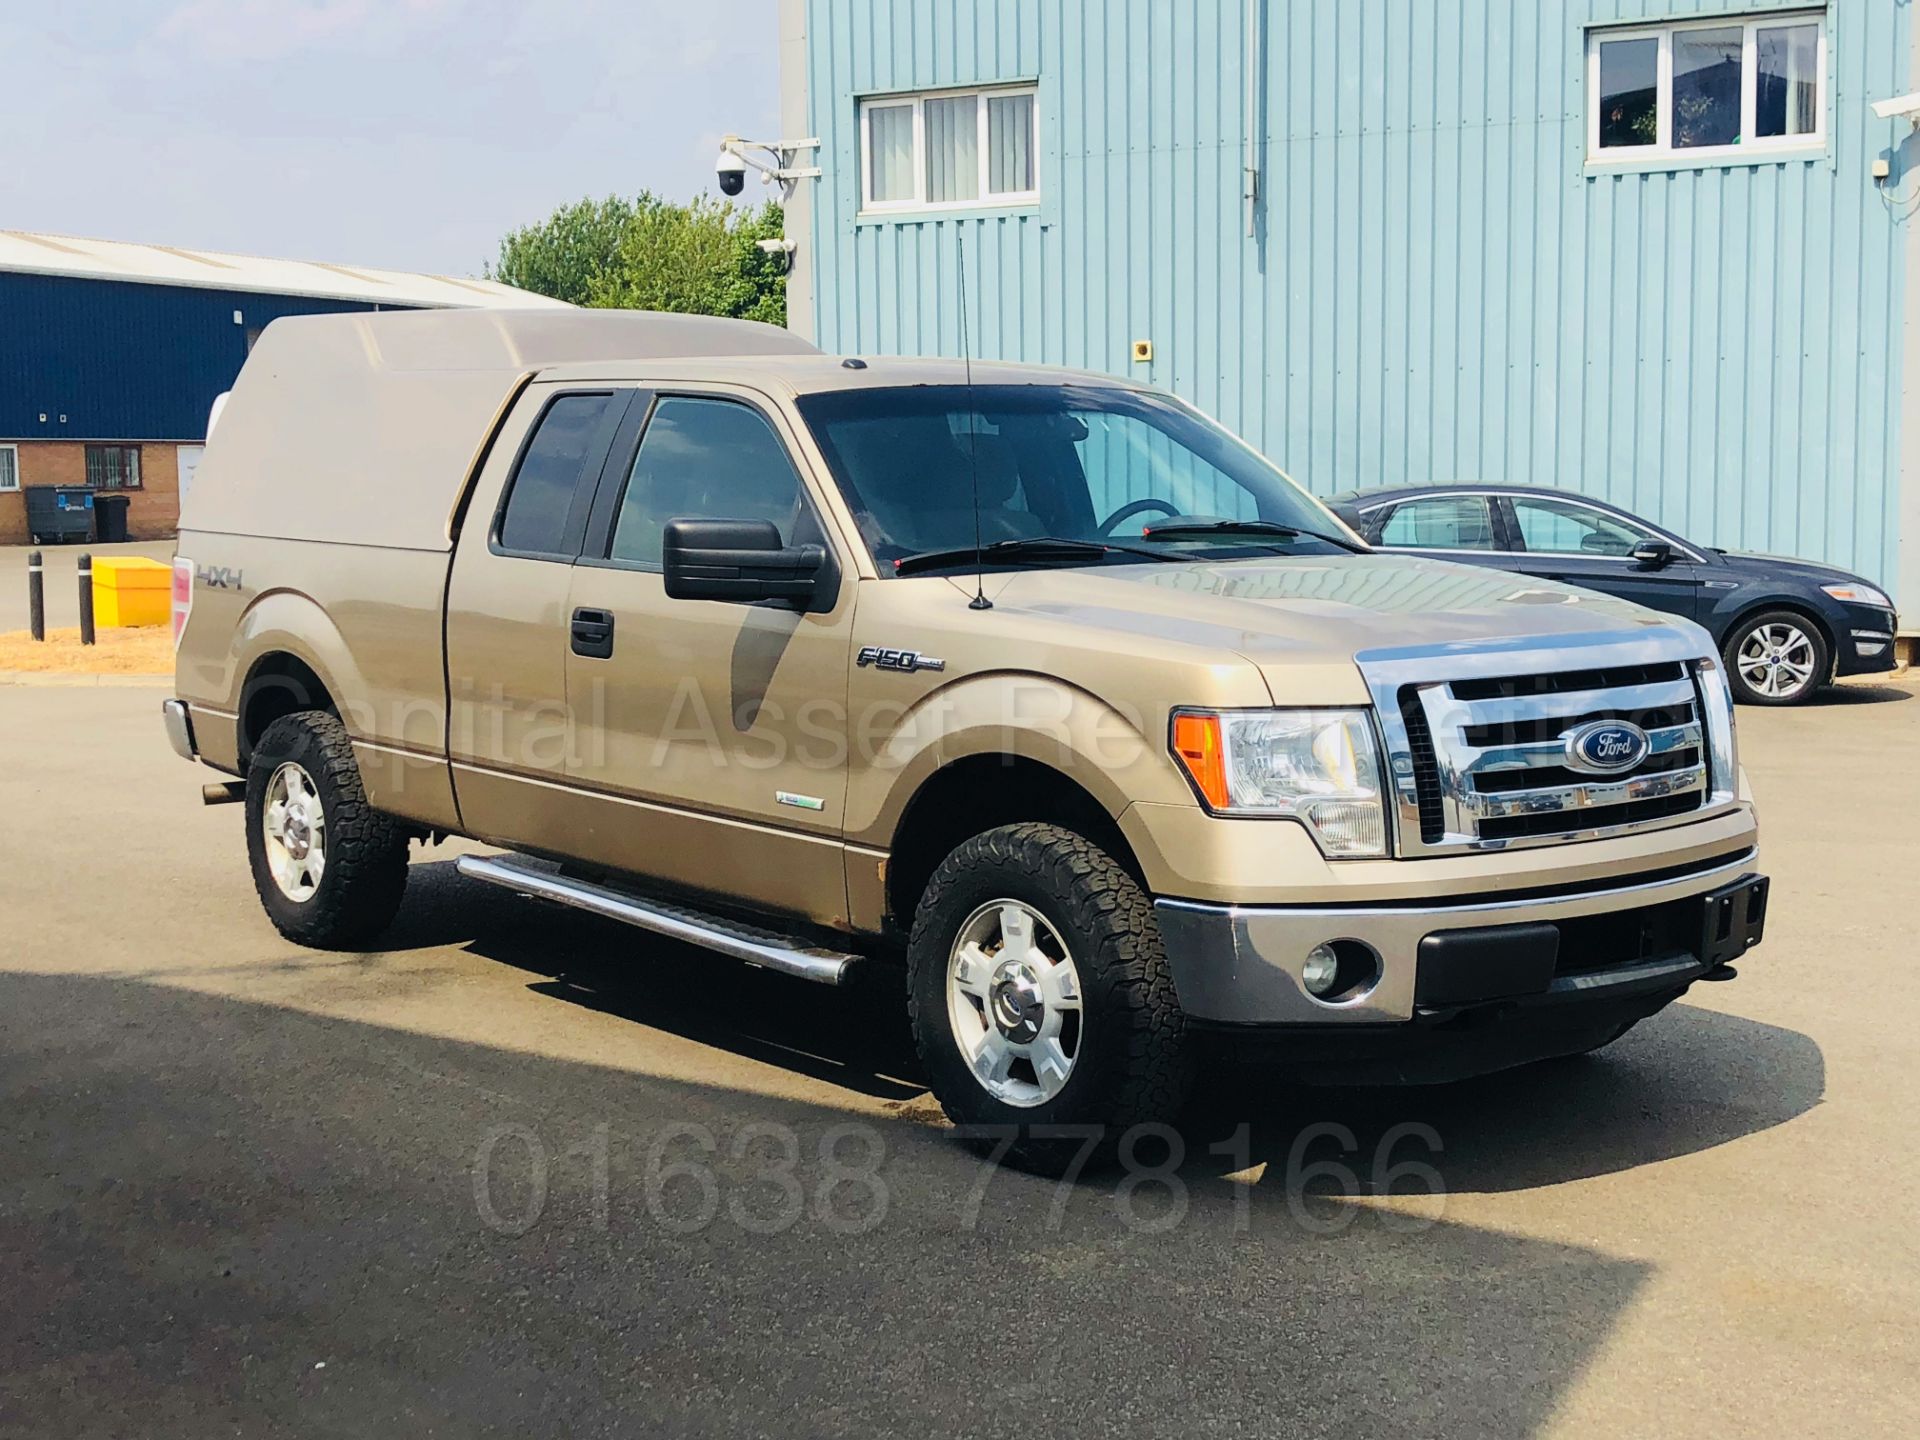 (On Sale) FORD F-150 5.4 V8 XLT EDITION KING-CAB (2012) MODEL**4X4**6 SEATER**AUTOMATIC *TOP SPEC*